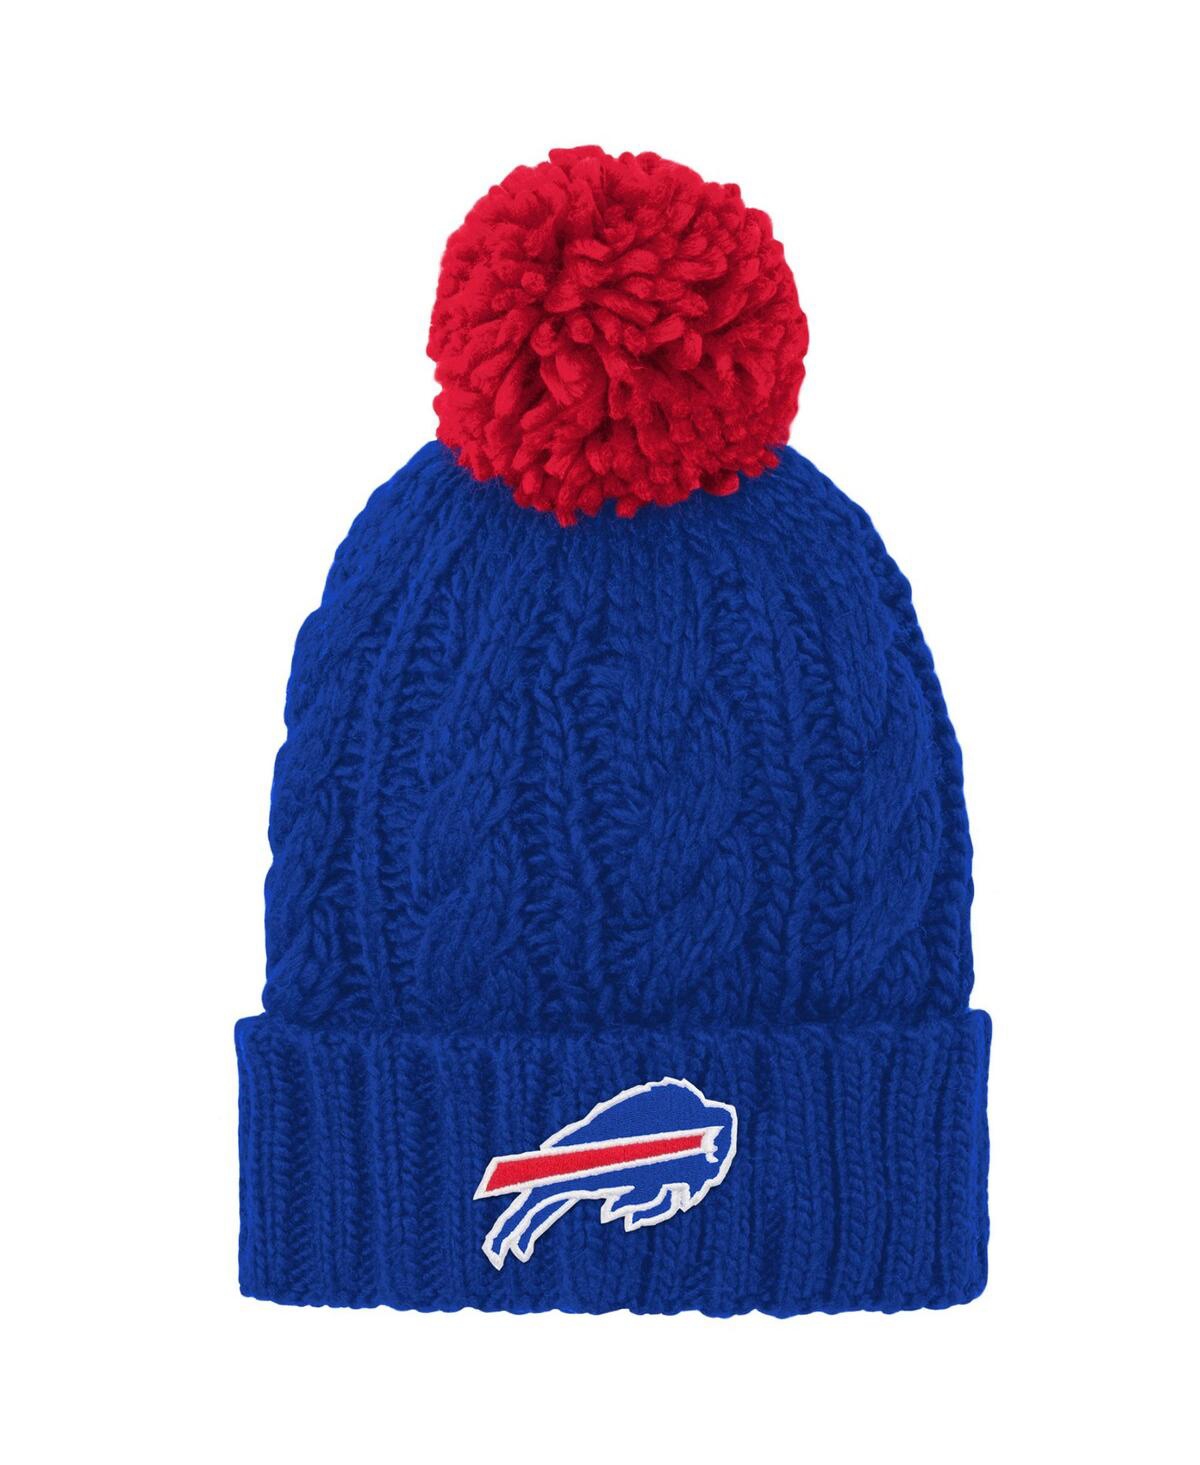 Outerstuff Kids' Big Girls Royal Buffalo Bills Team Cable Cuffed Knit Hat With Pom